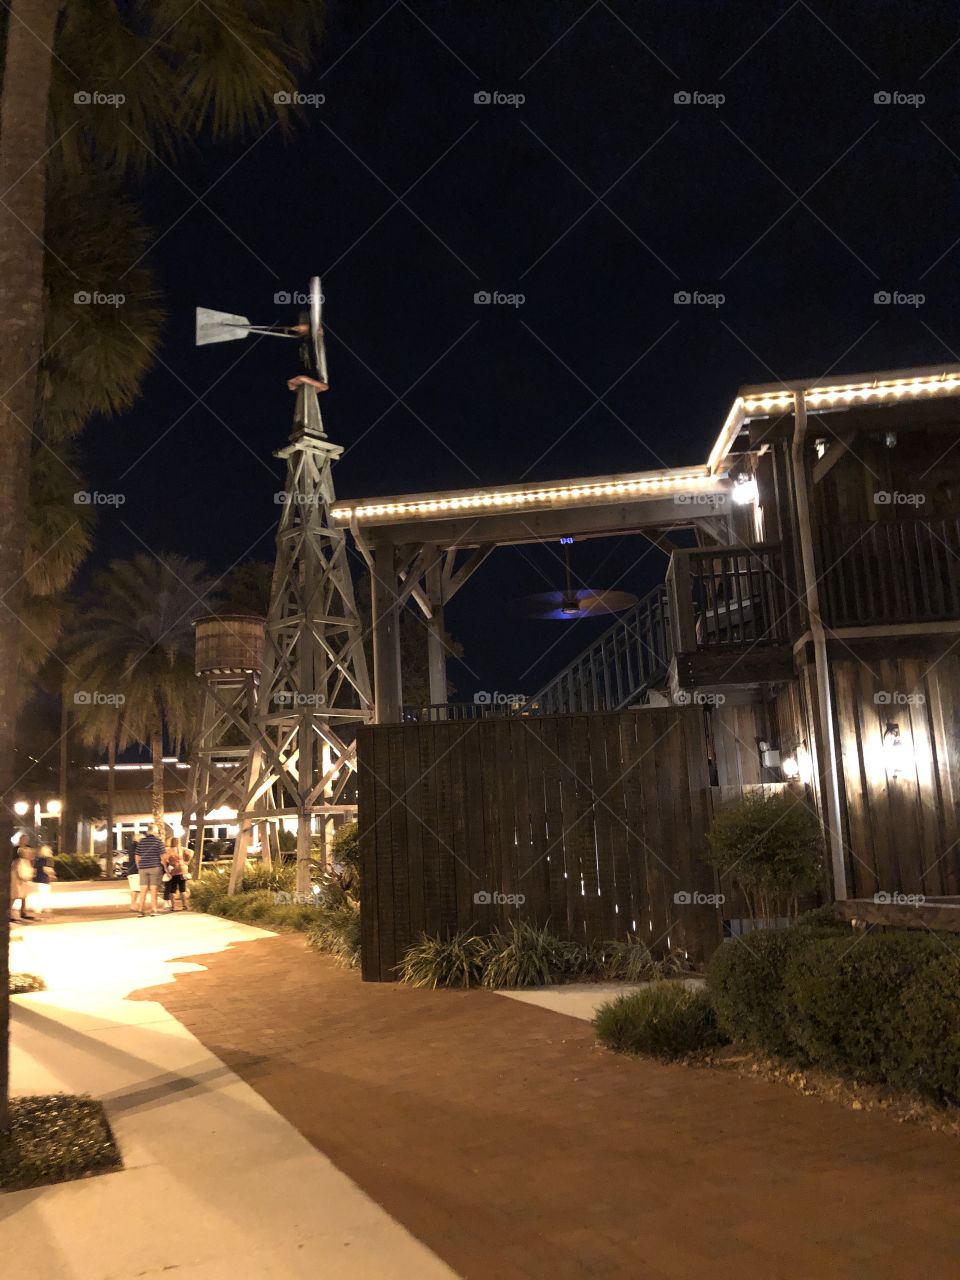 The Villages Of Florida, USA At Nighttime